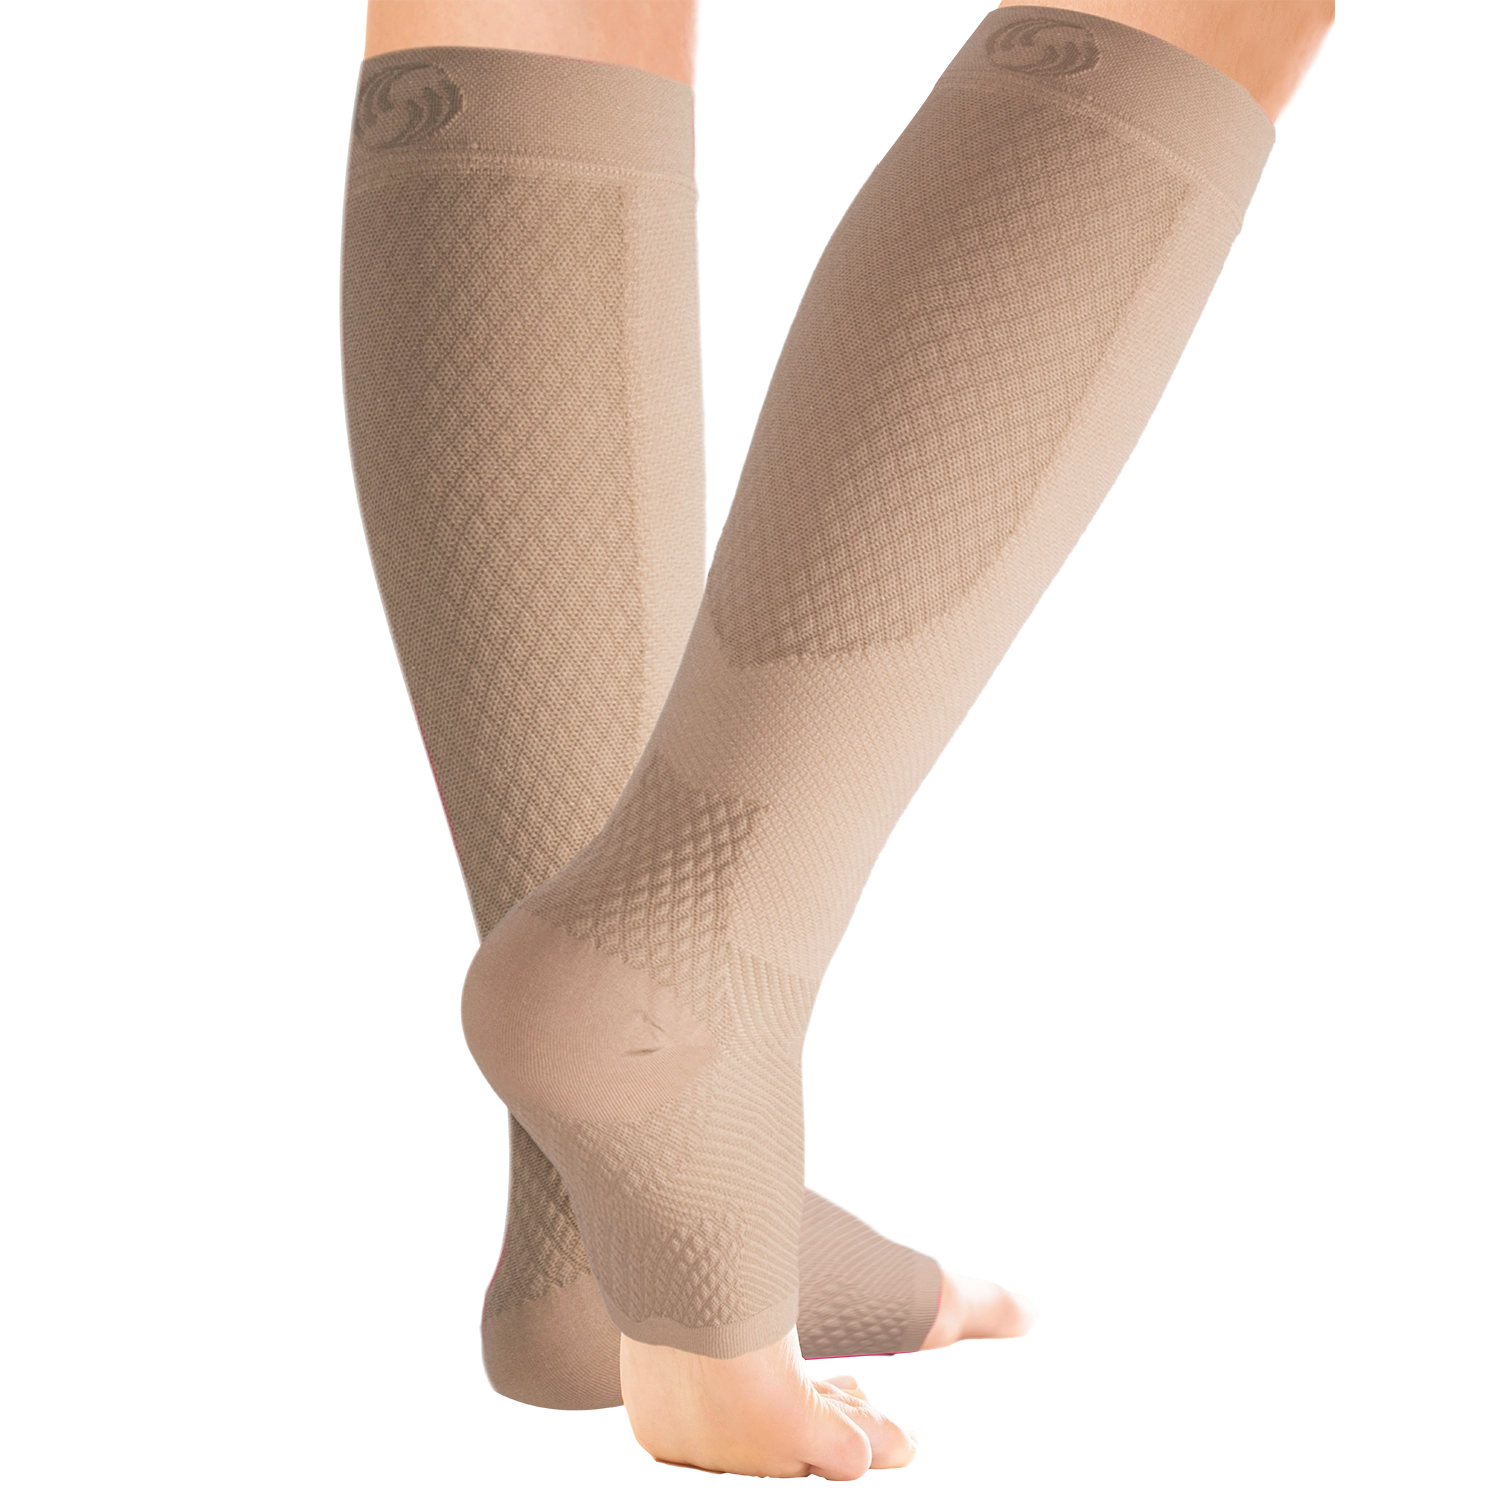 Zip Up Compression Socks Leg Orthopedic Support Stockings Unisex Support  Hose US - DR Trouble